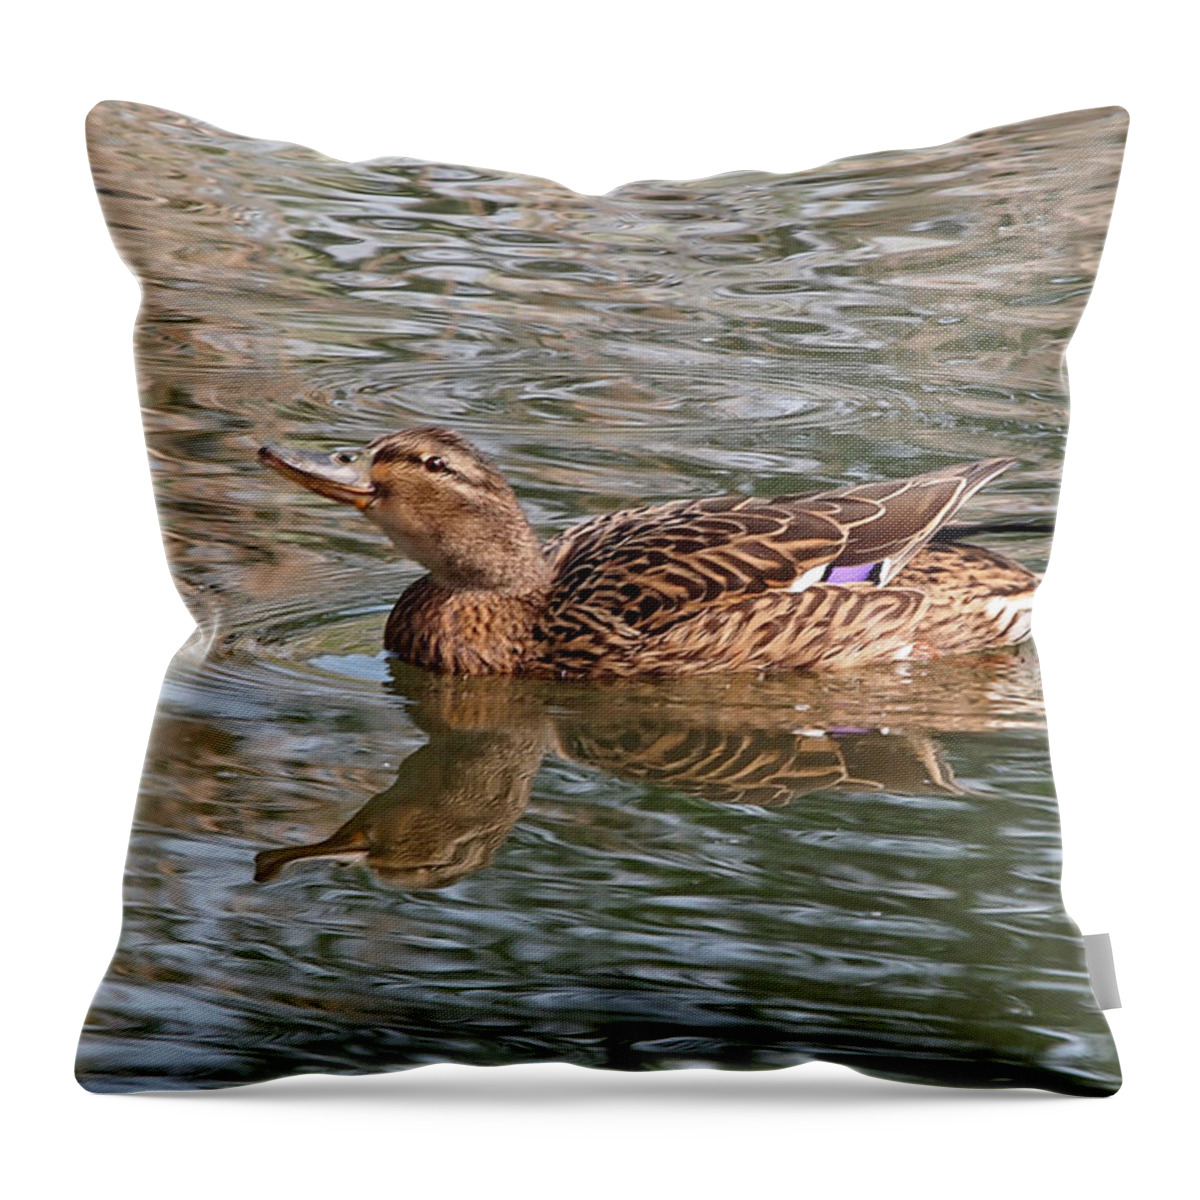 Ducklings Throw Pillow featuring the photograph Keep Up by Gill Billington